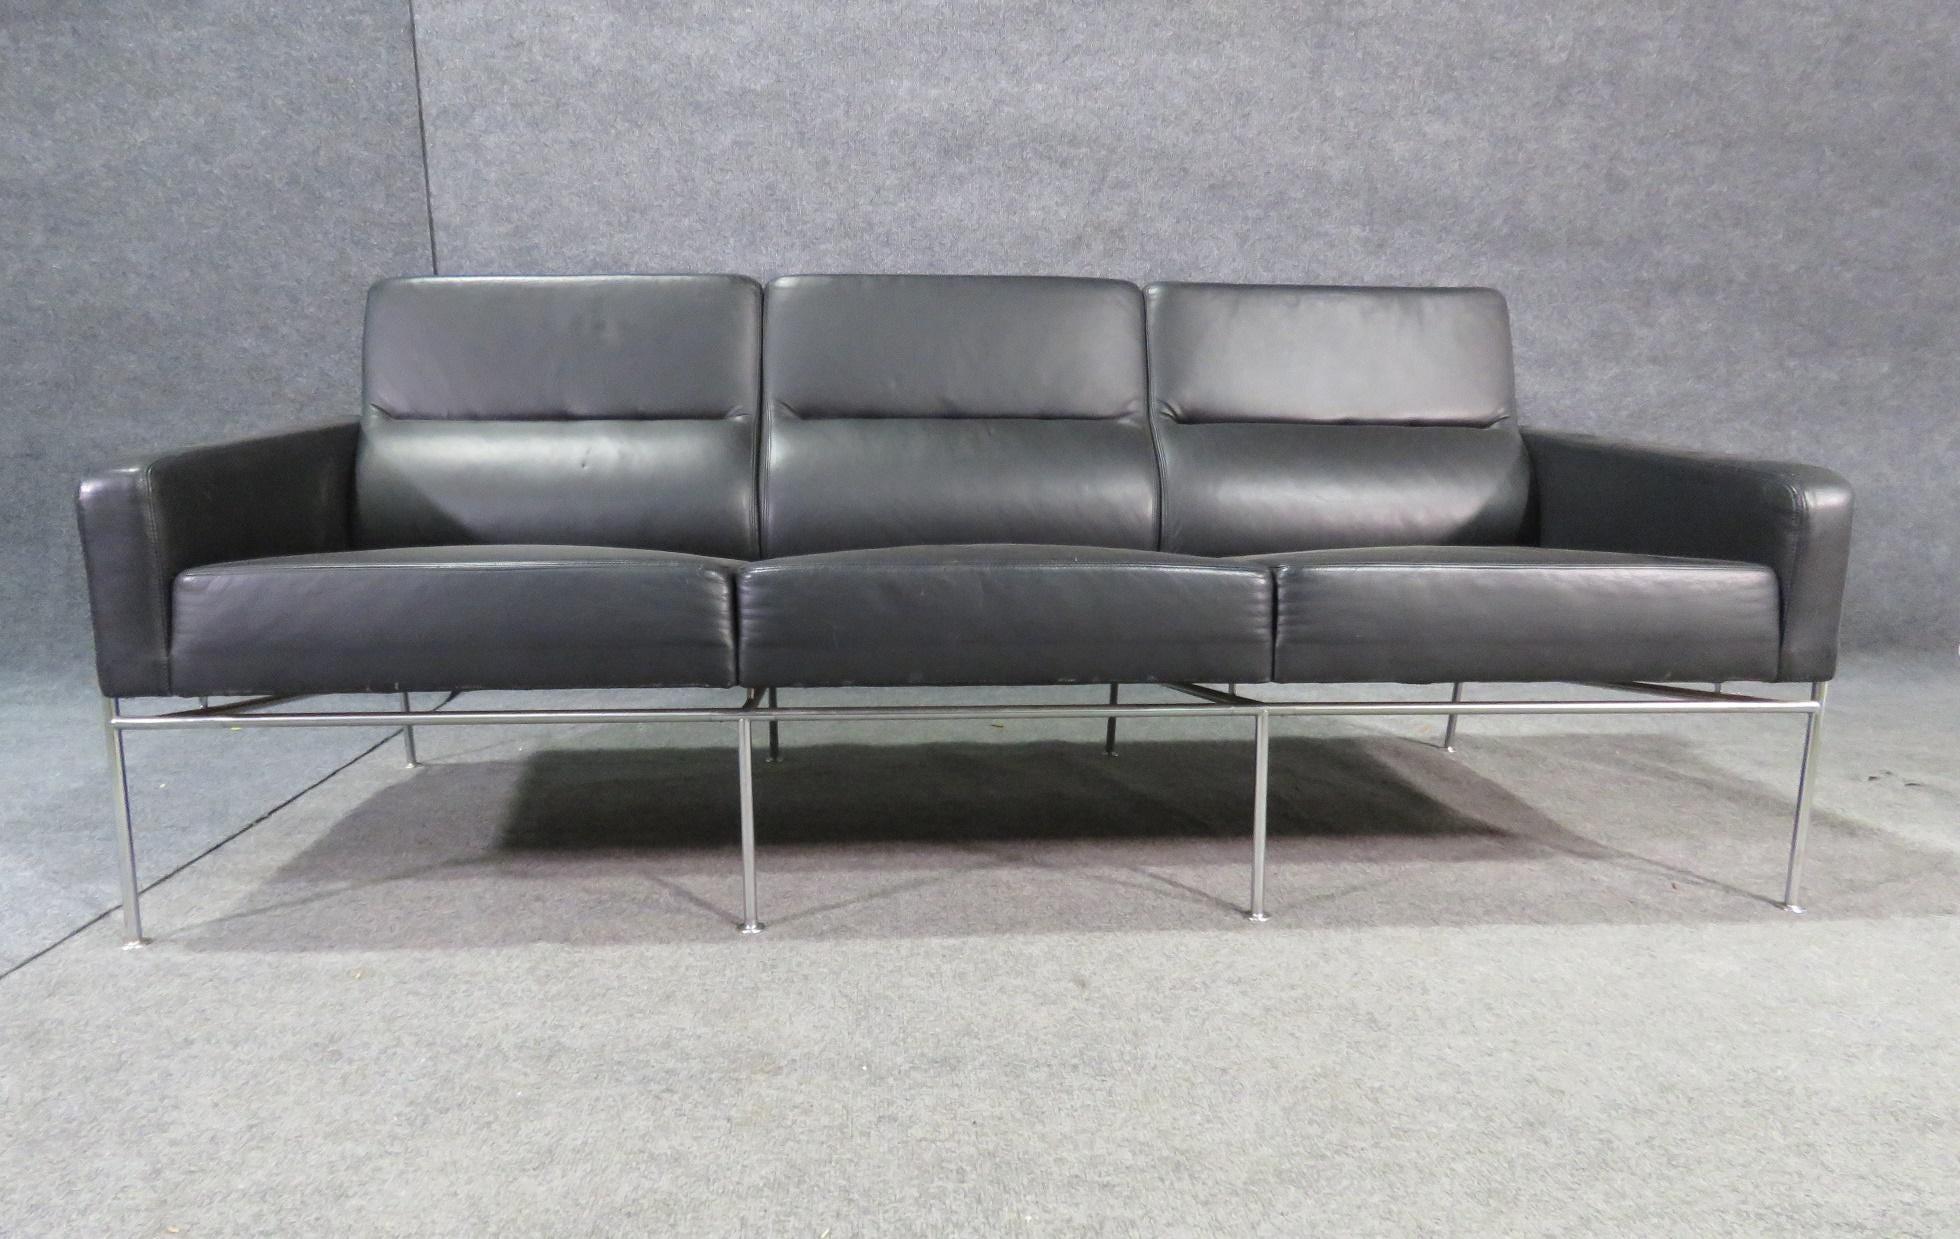 This Mid-Century Modern sofa, styled after the iconic designs of Arne Jacobsen, boasts a stylish simple construction paired with sleek black leather and chrome. Comfortable and easy to clean, this sofa is a practical, versatile, and sophisticated